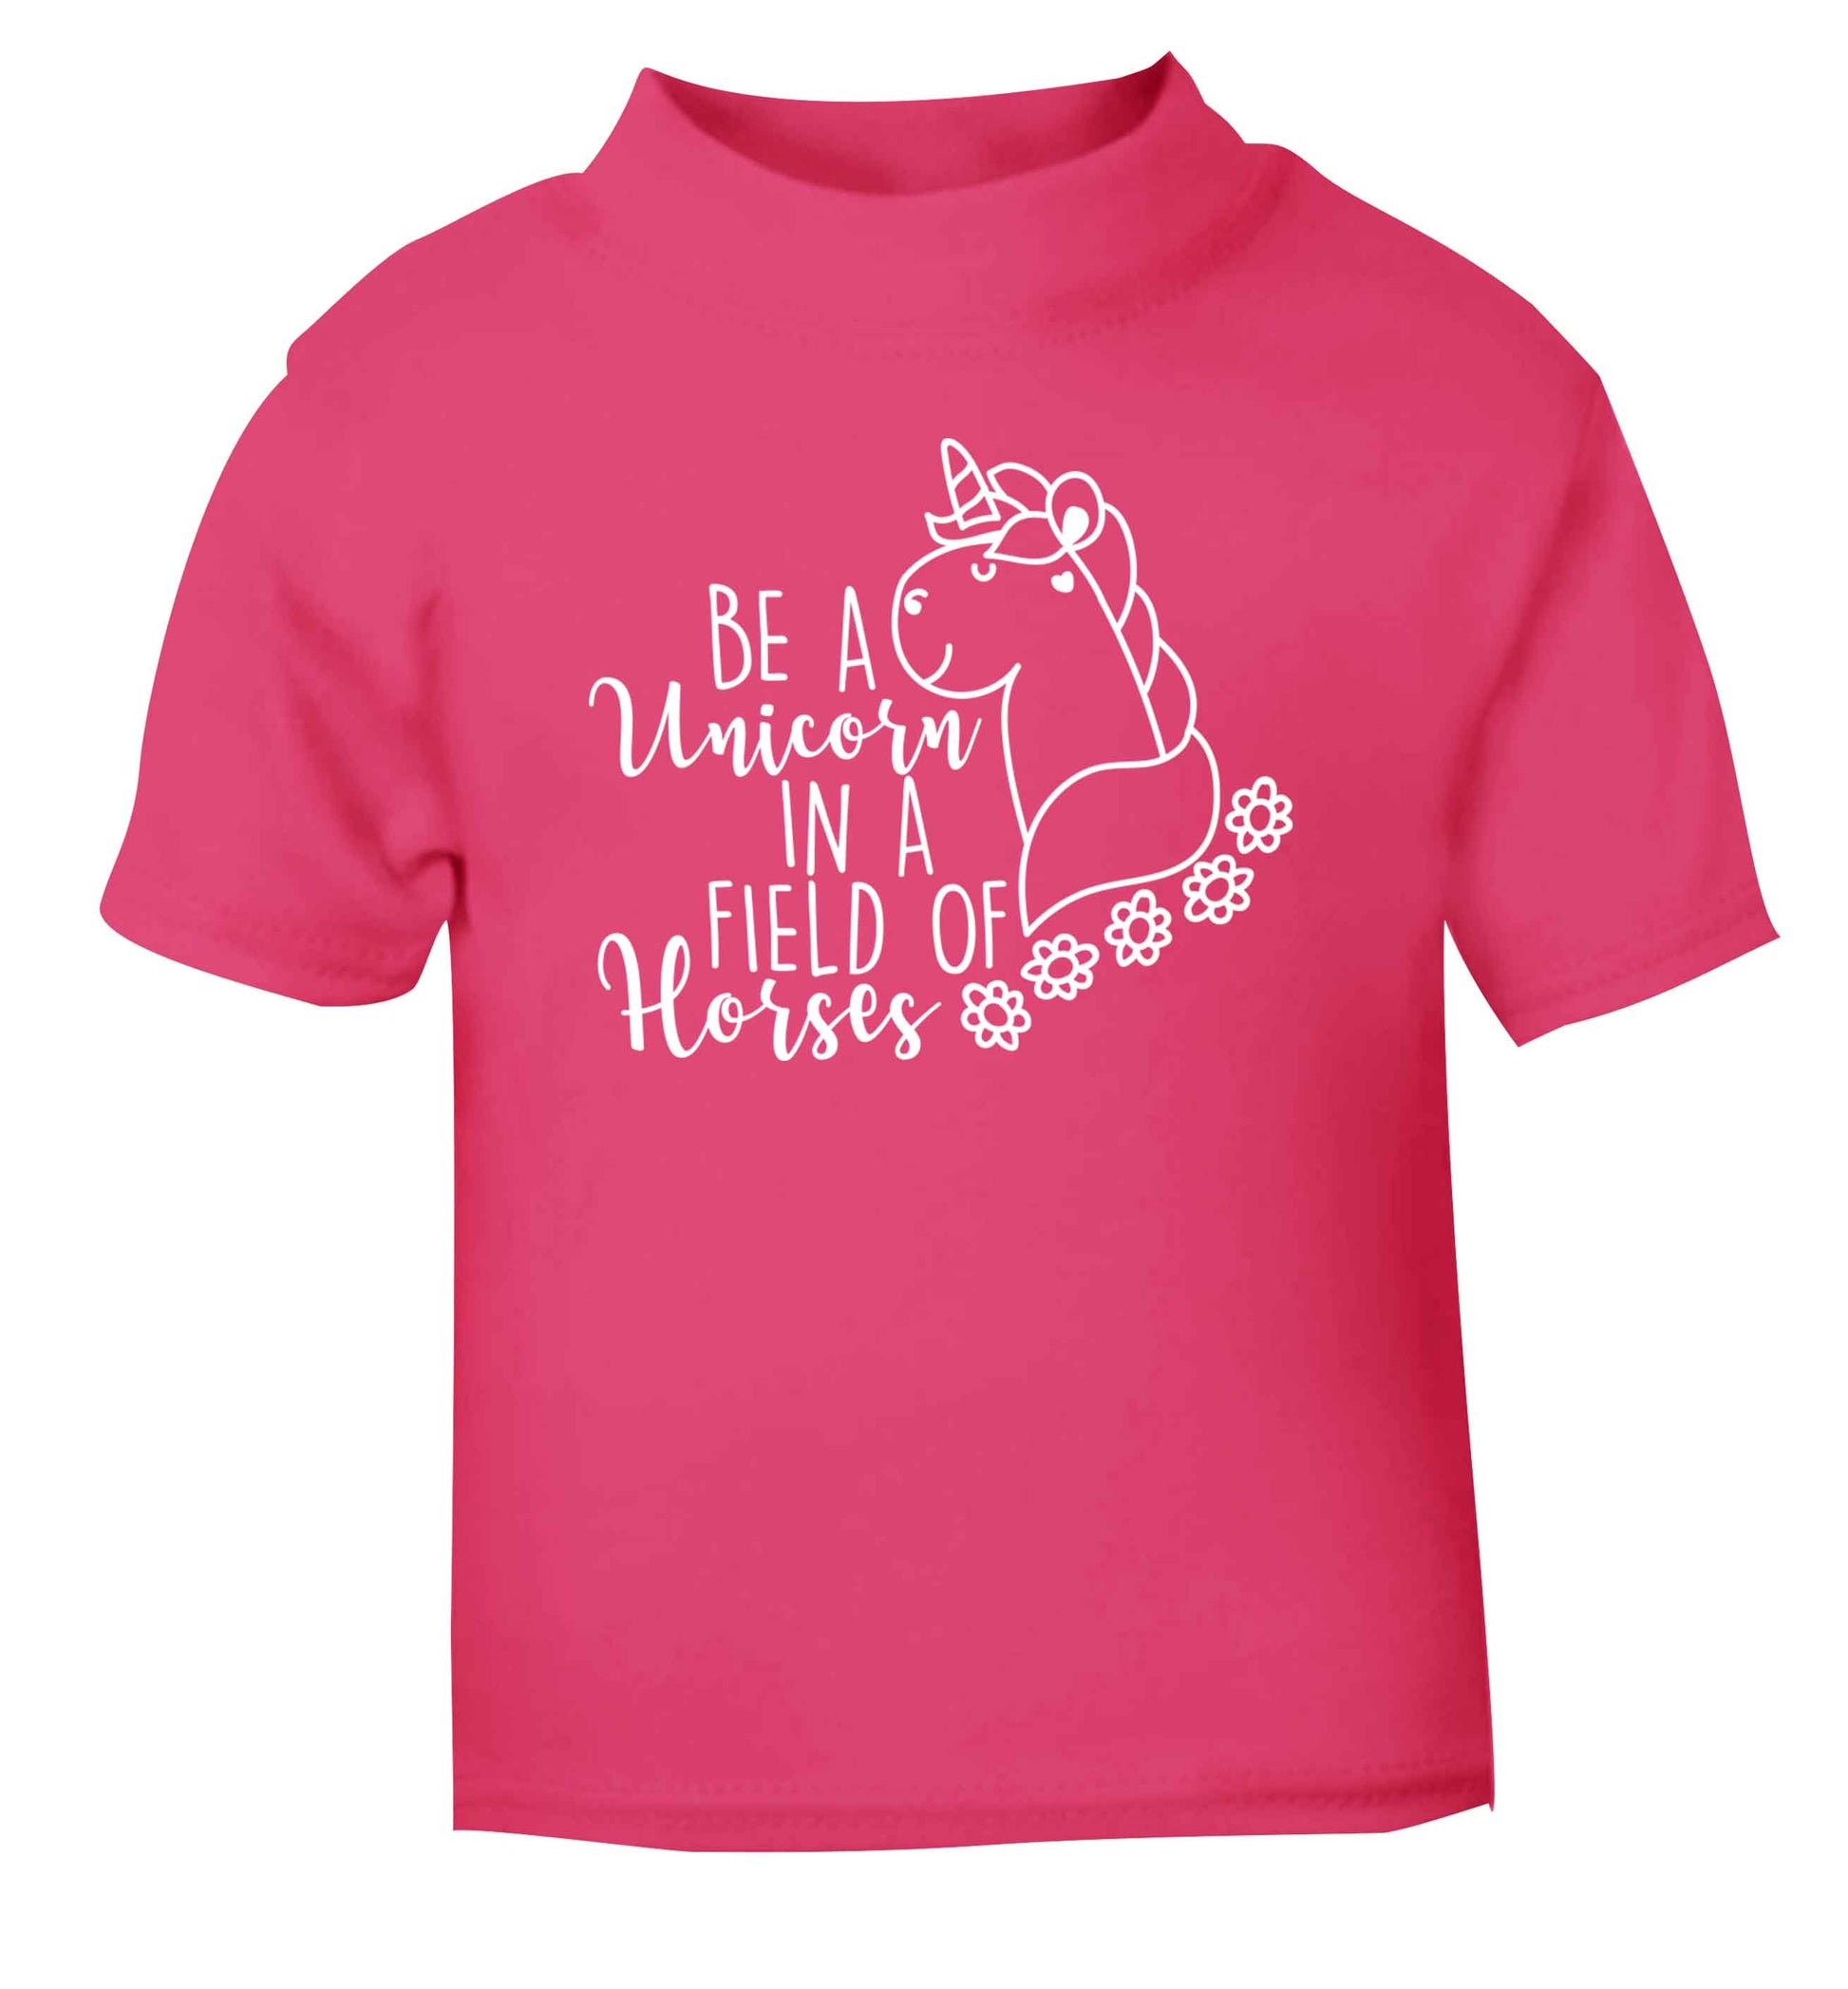 Be a unicorn in a field of horses pink Baby Toddler Tshirt 2 Years